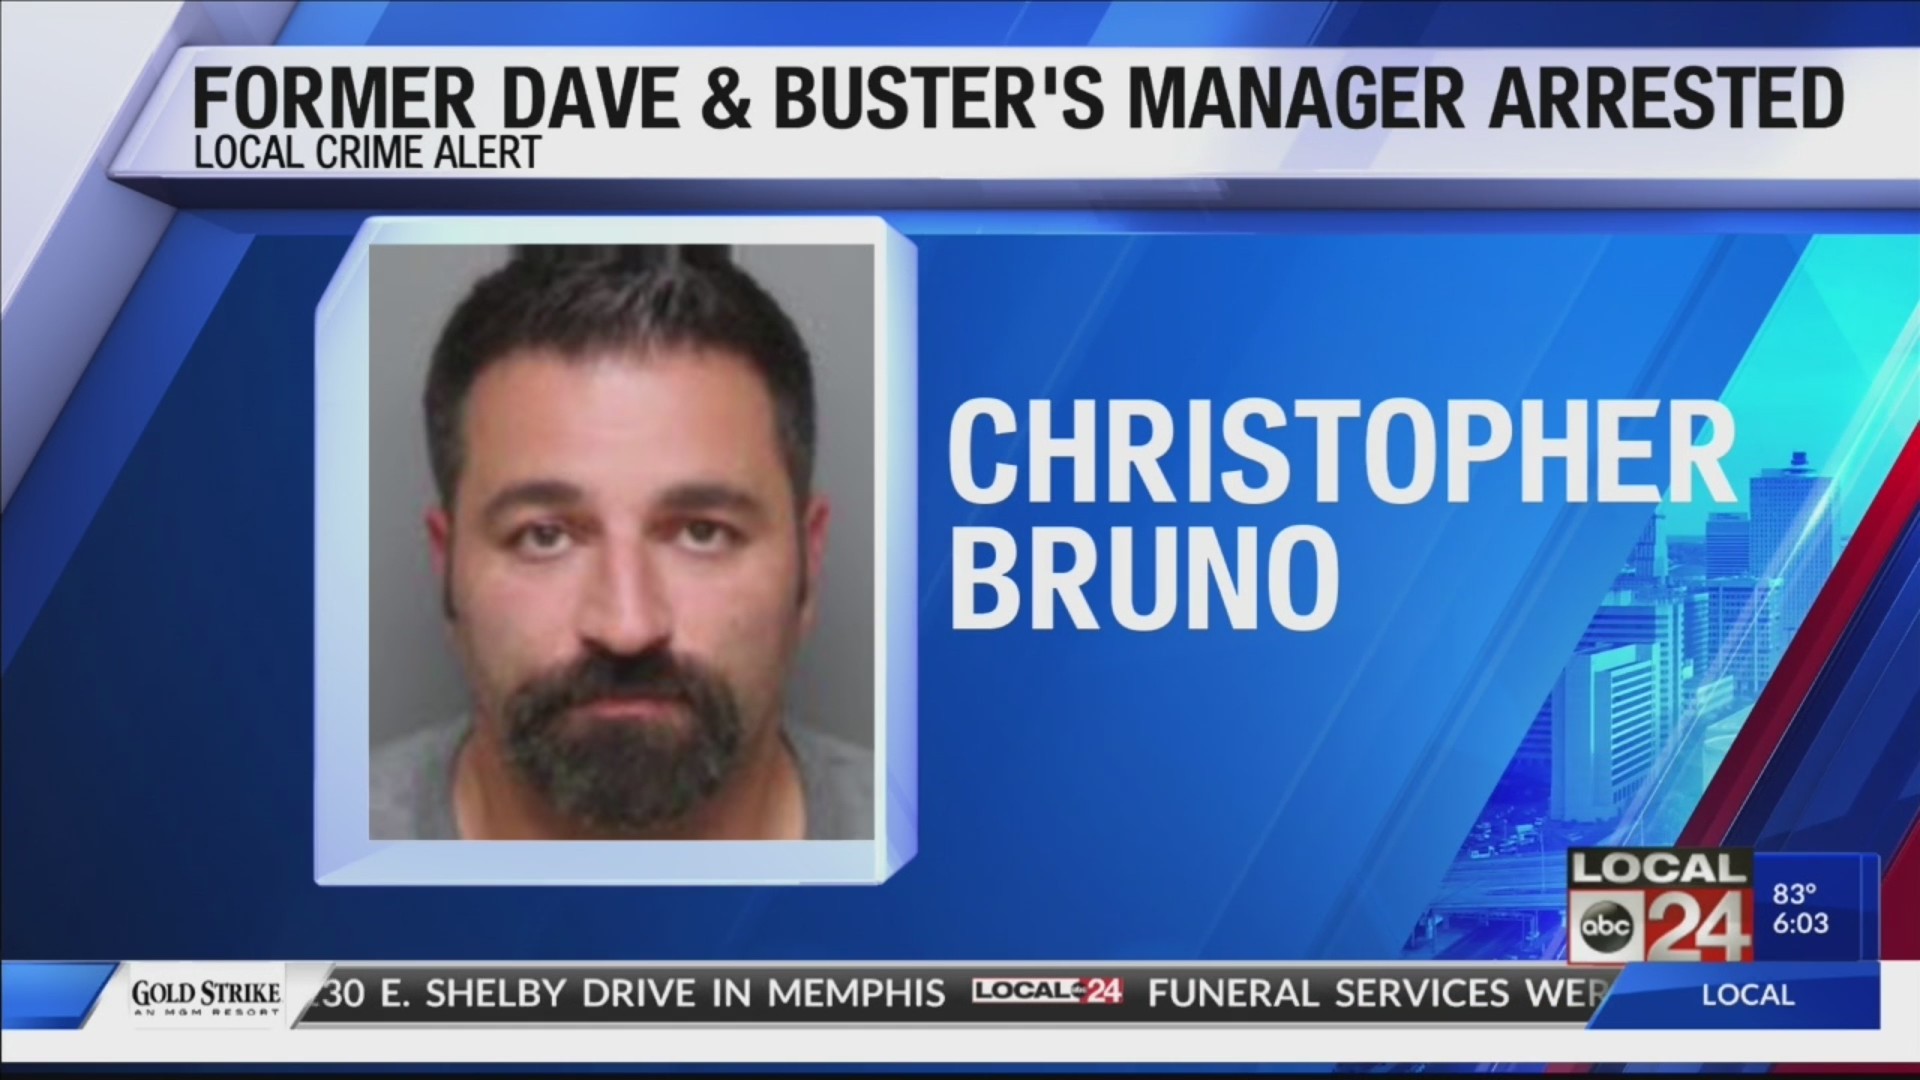 Former Dave & Buster's General Manager charged with stealing more than $140,000 from business